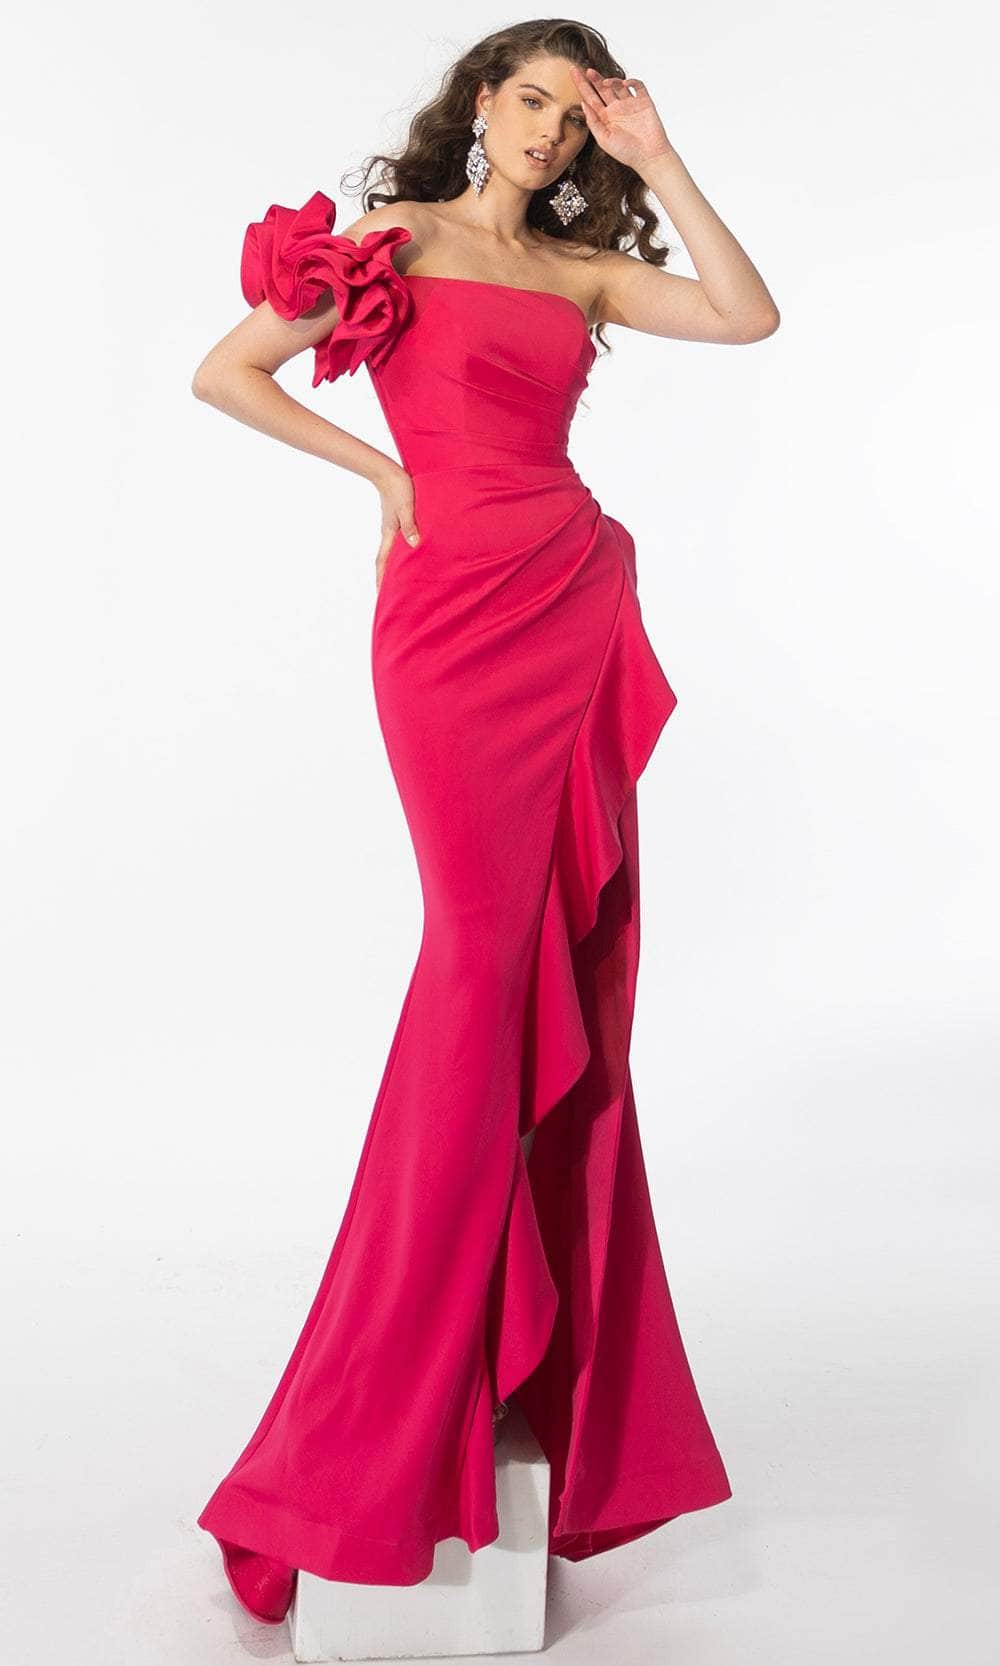 Ava Presley 39265 - Ruffle Sleeve Prom Dress with Slit Special Occasion Dresse 00 /  Red